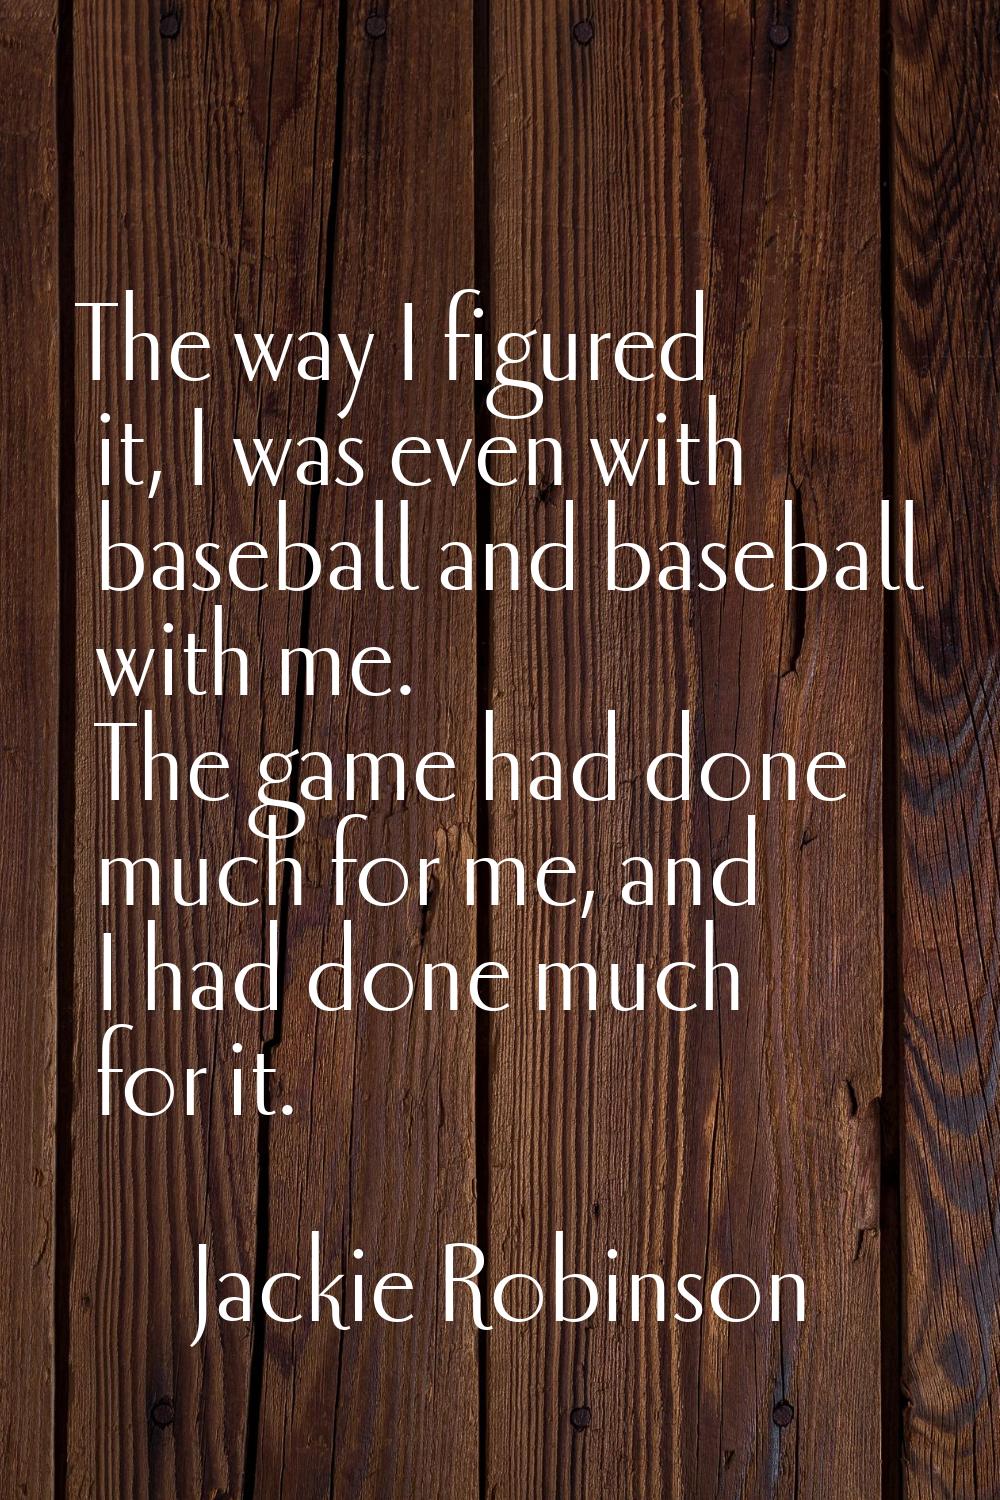 The way I figured it, I was even with baseball and baseball with me. The game had done much for me,